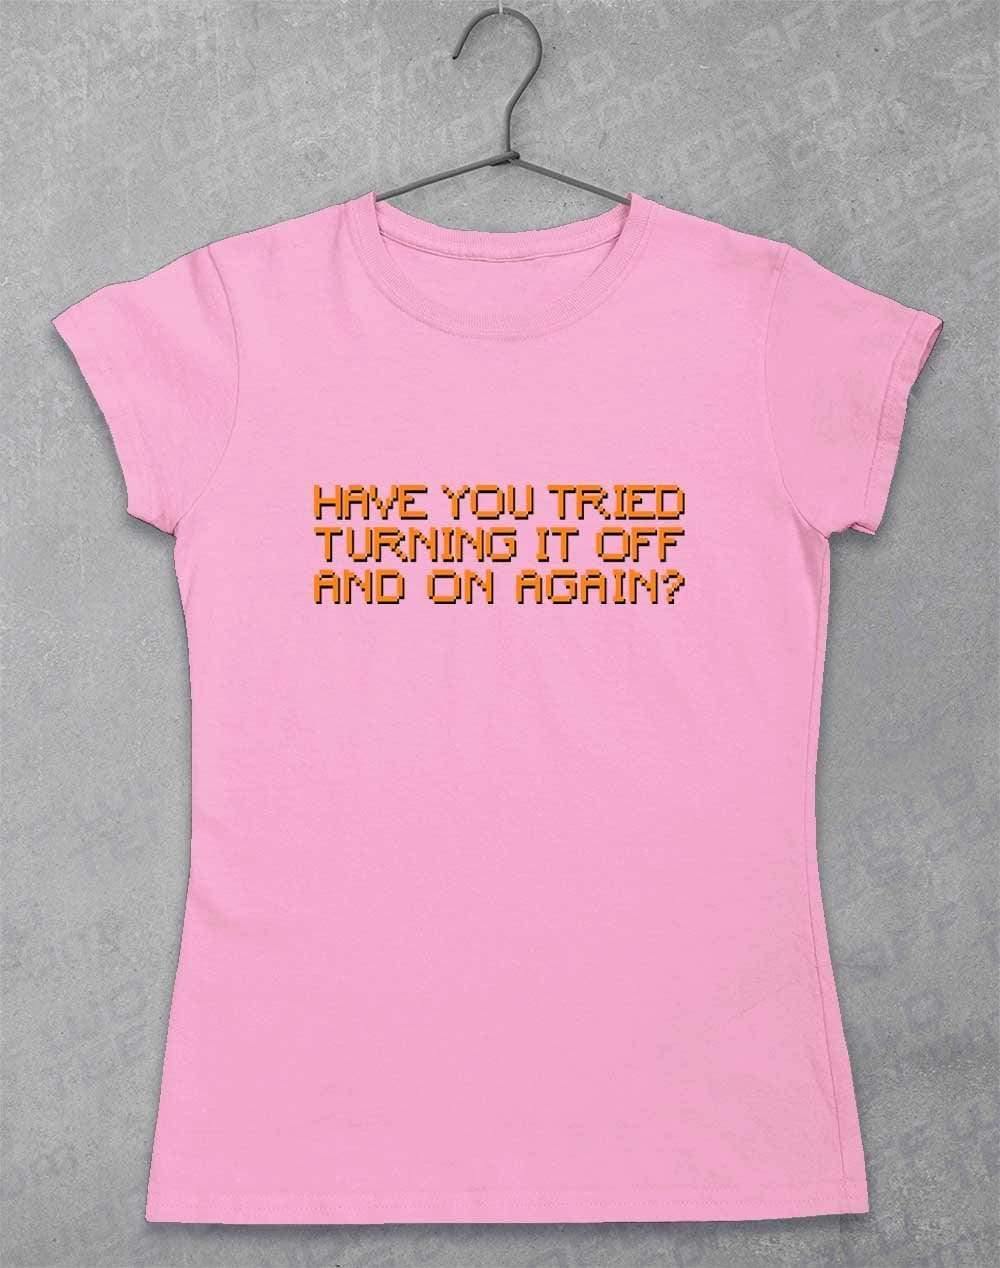 Off and On Again Women's T-Shirt 8-10 / Light Pink  - Off World Tees